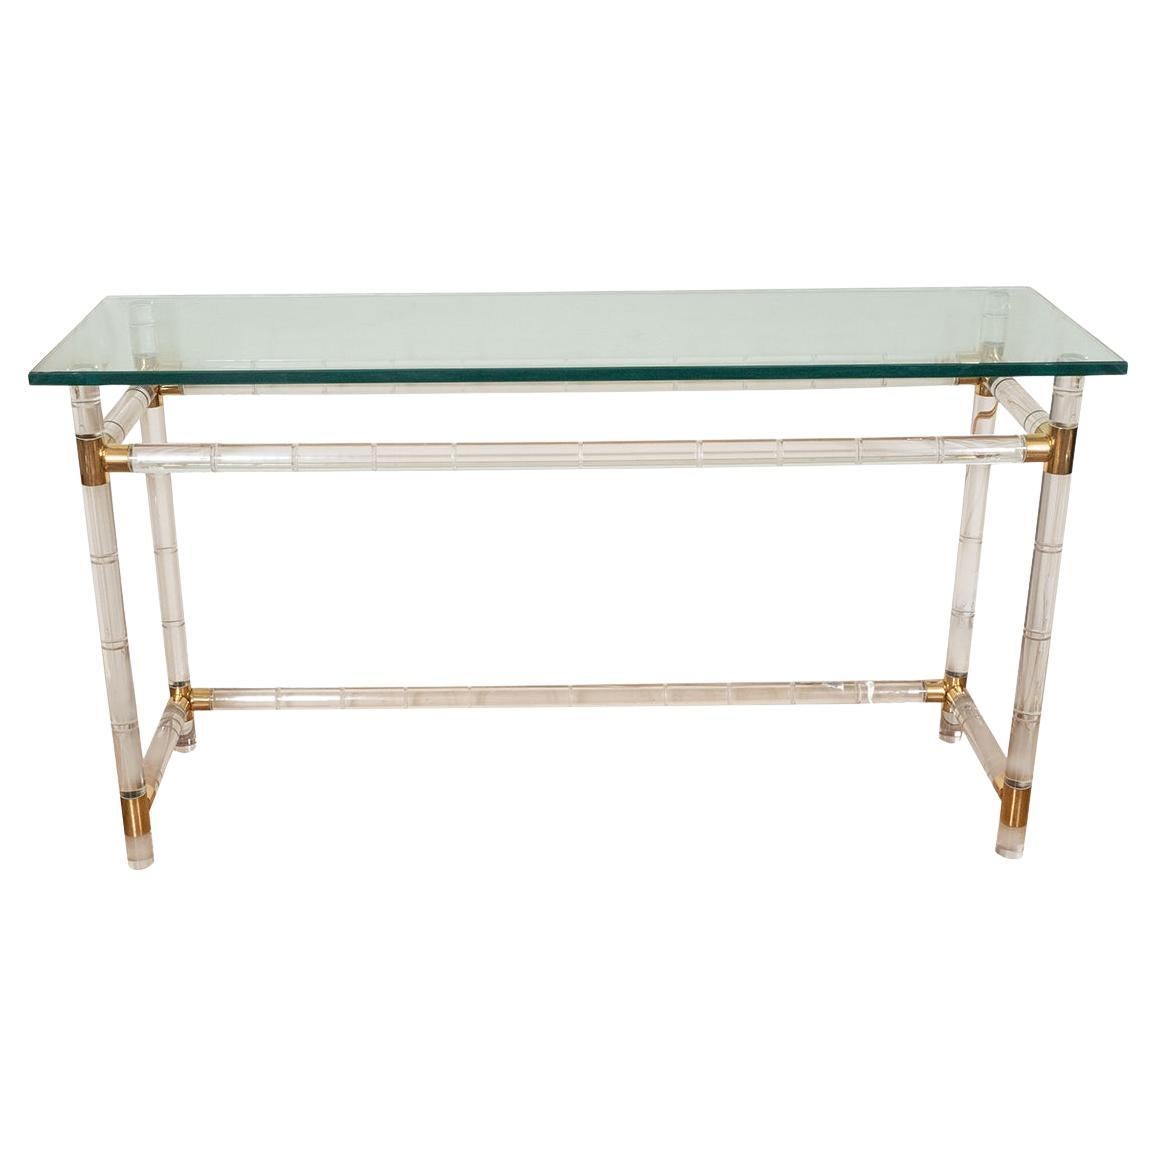 Brass lucite and glass slender console